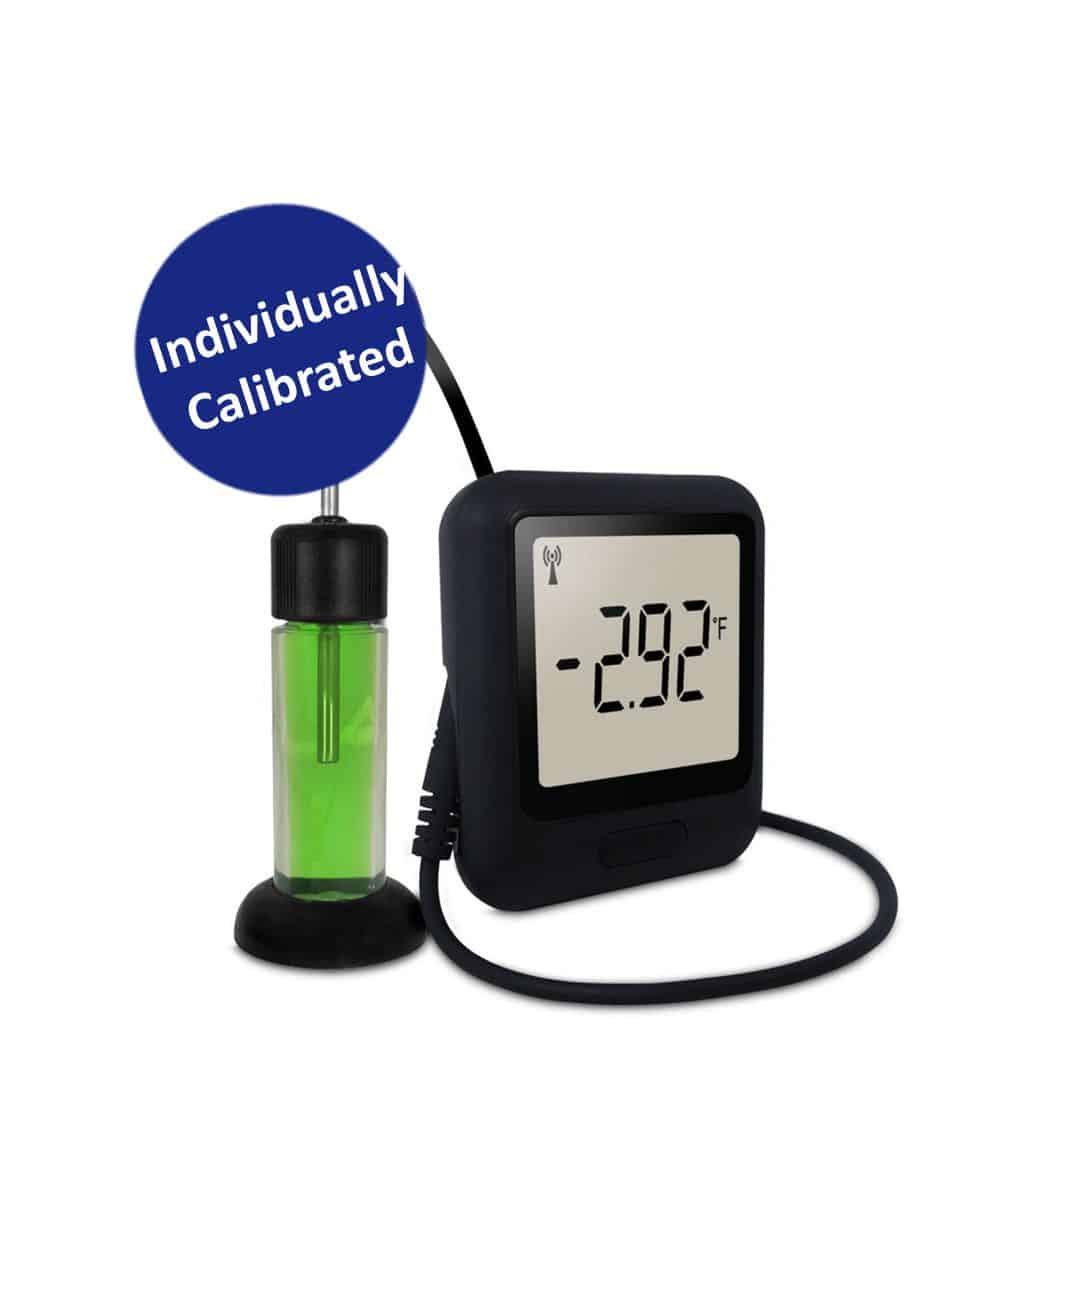 Calibrated WiFi Temperature Data Logger with Glycol Probe (LOGW-004C) -40 to 125°C (-40 to 257°F)